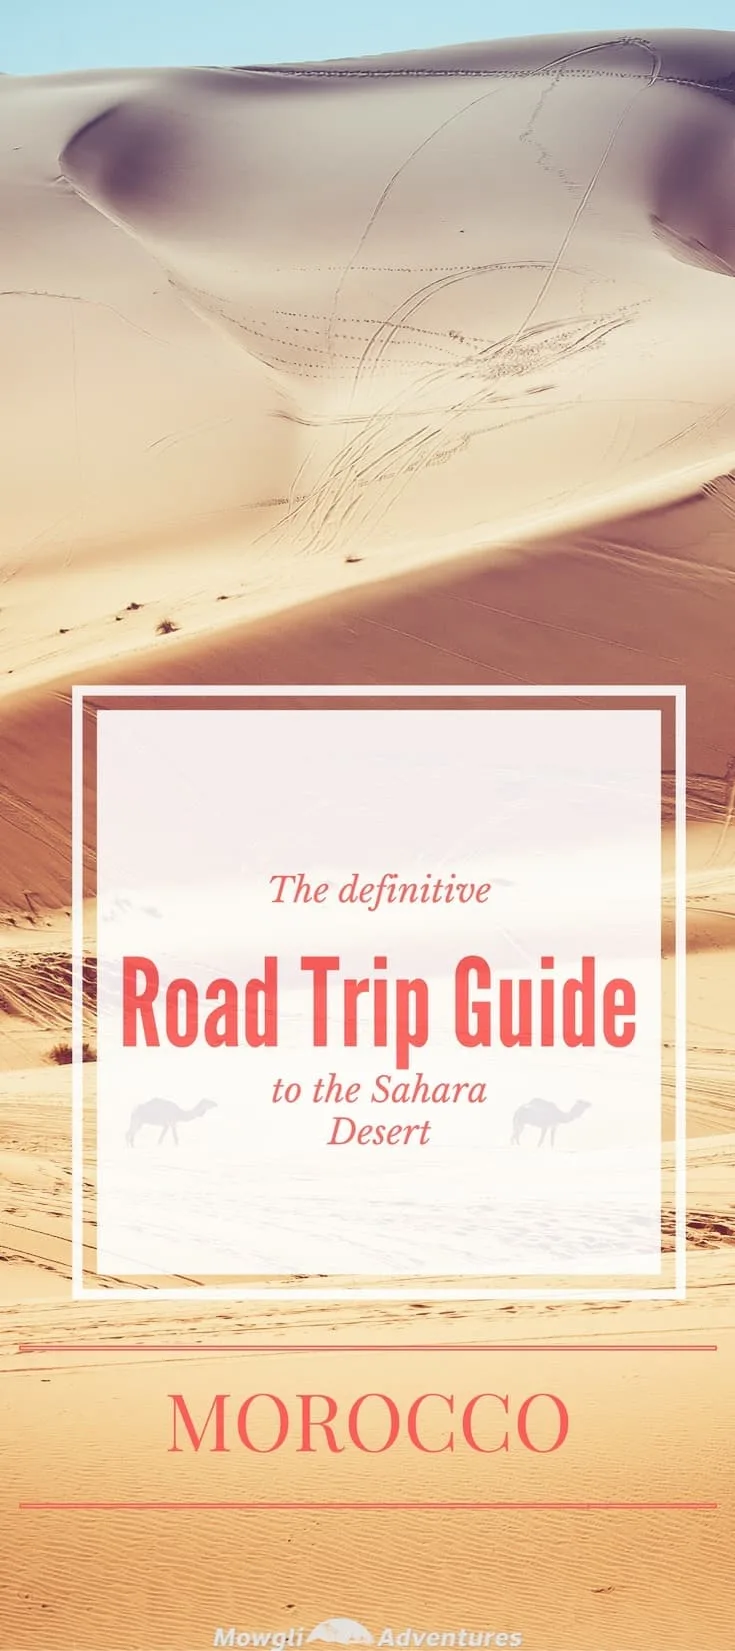 Use this definitive road trip guide to the Sahara Desert of Morocco to plan your next adventure into the desert landscape of your dreams.